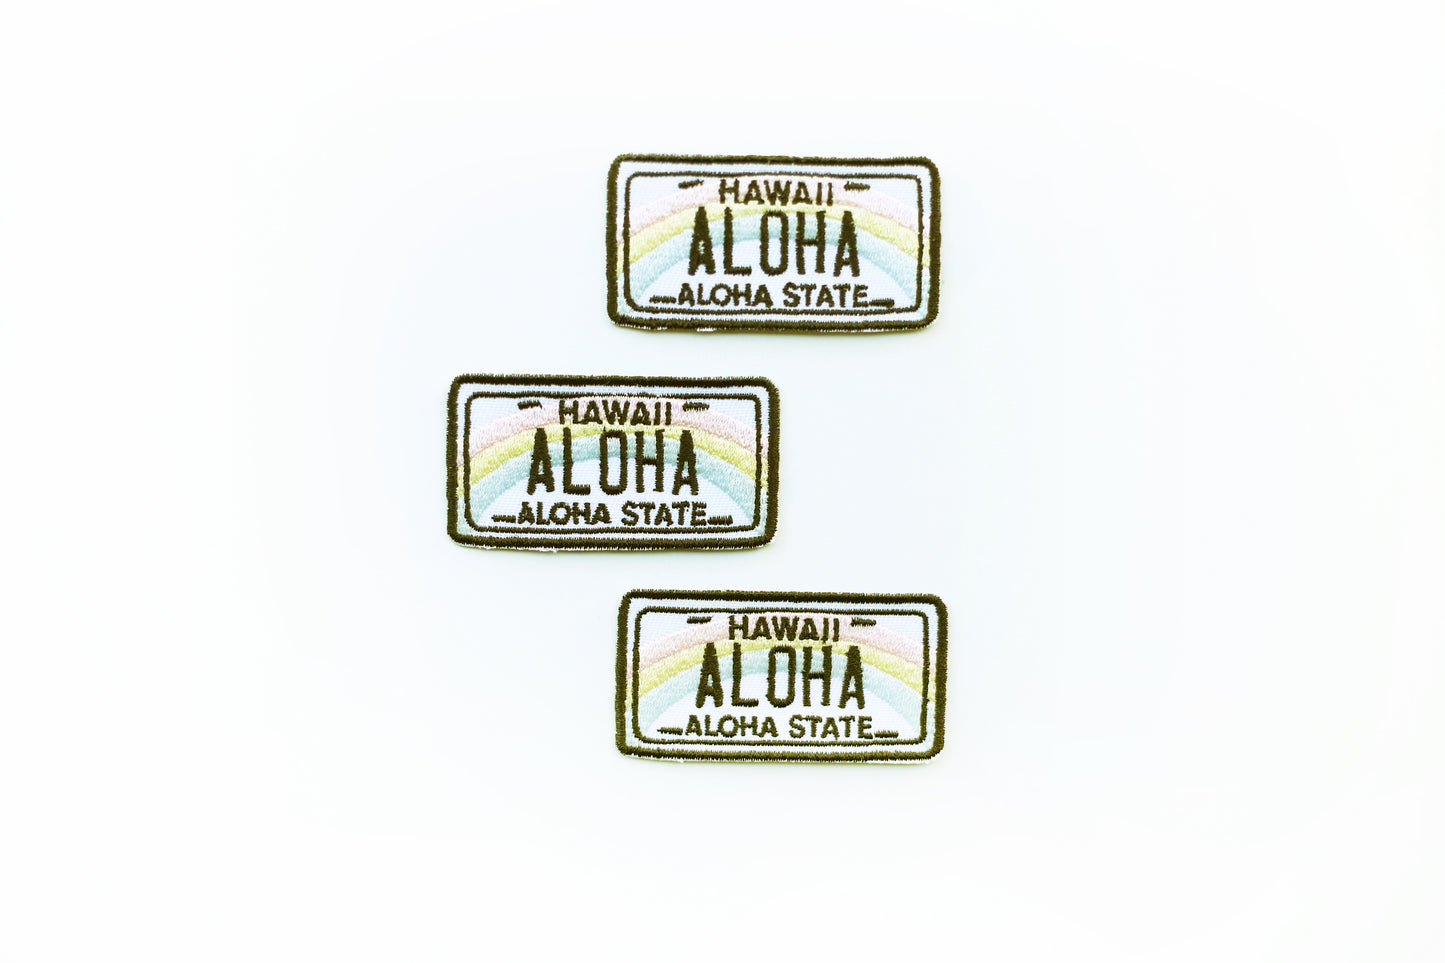 Hawaii License Plate Patch